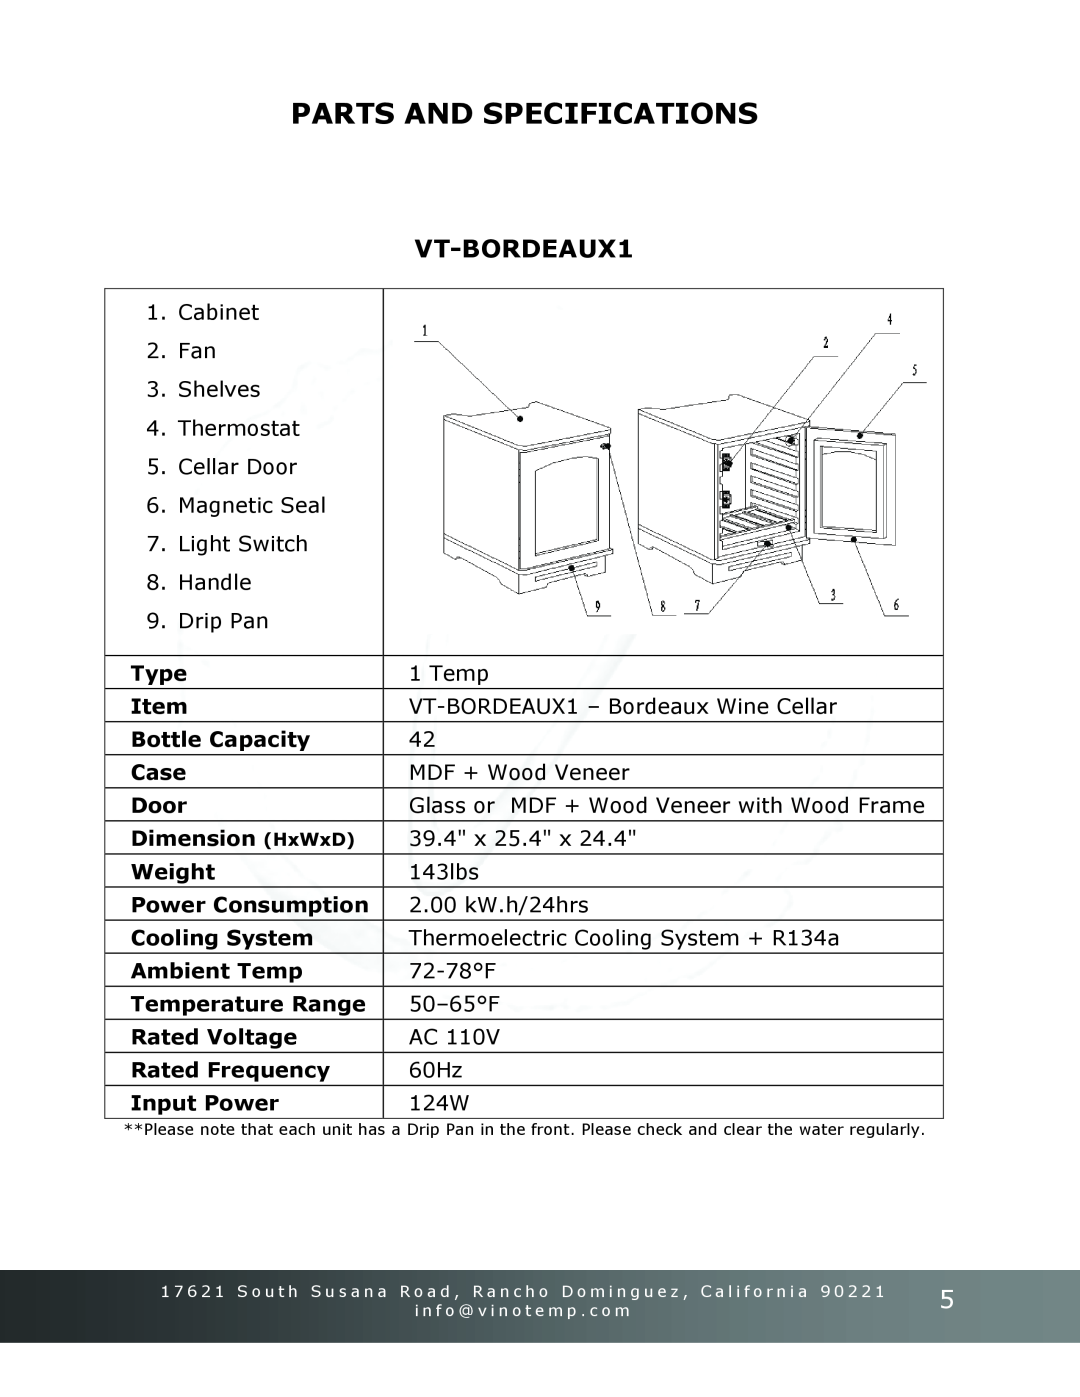 Vinotemp Portofino owner manual Parts And Specifications, VT-BORDEAUX1 